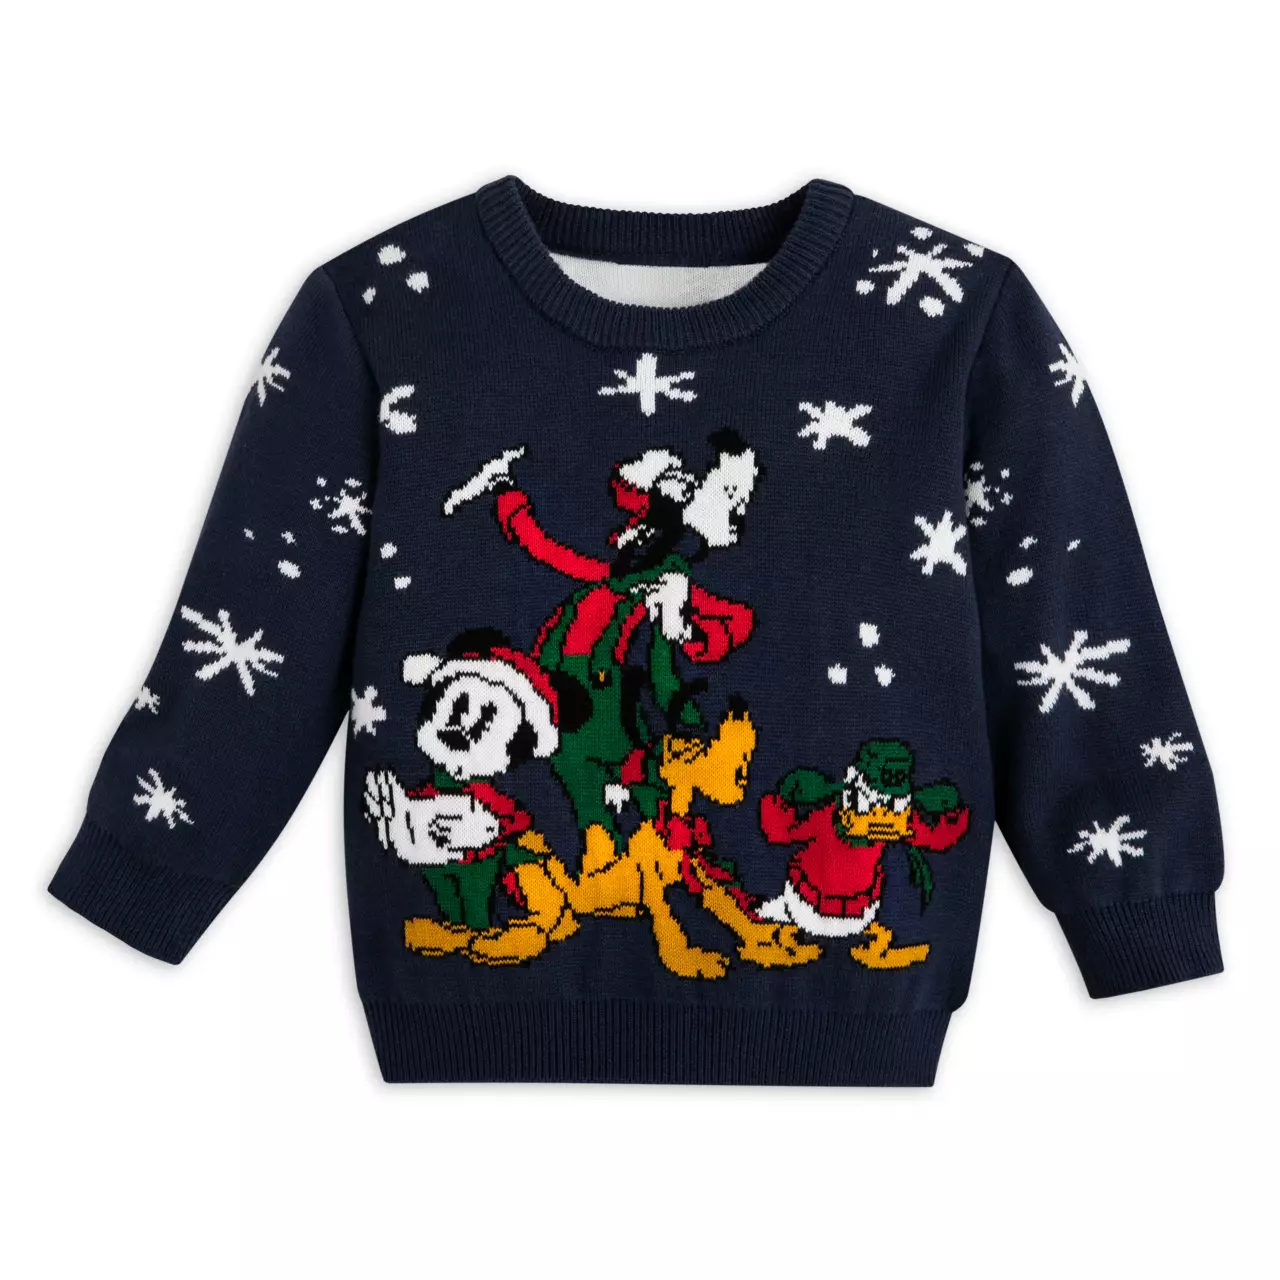 a dark blue sweater showing mickey, goofy, and pluto caroling while donald holds his ears angrily